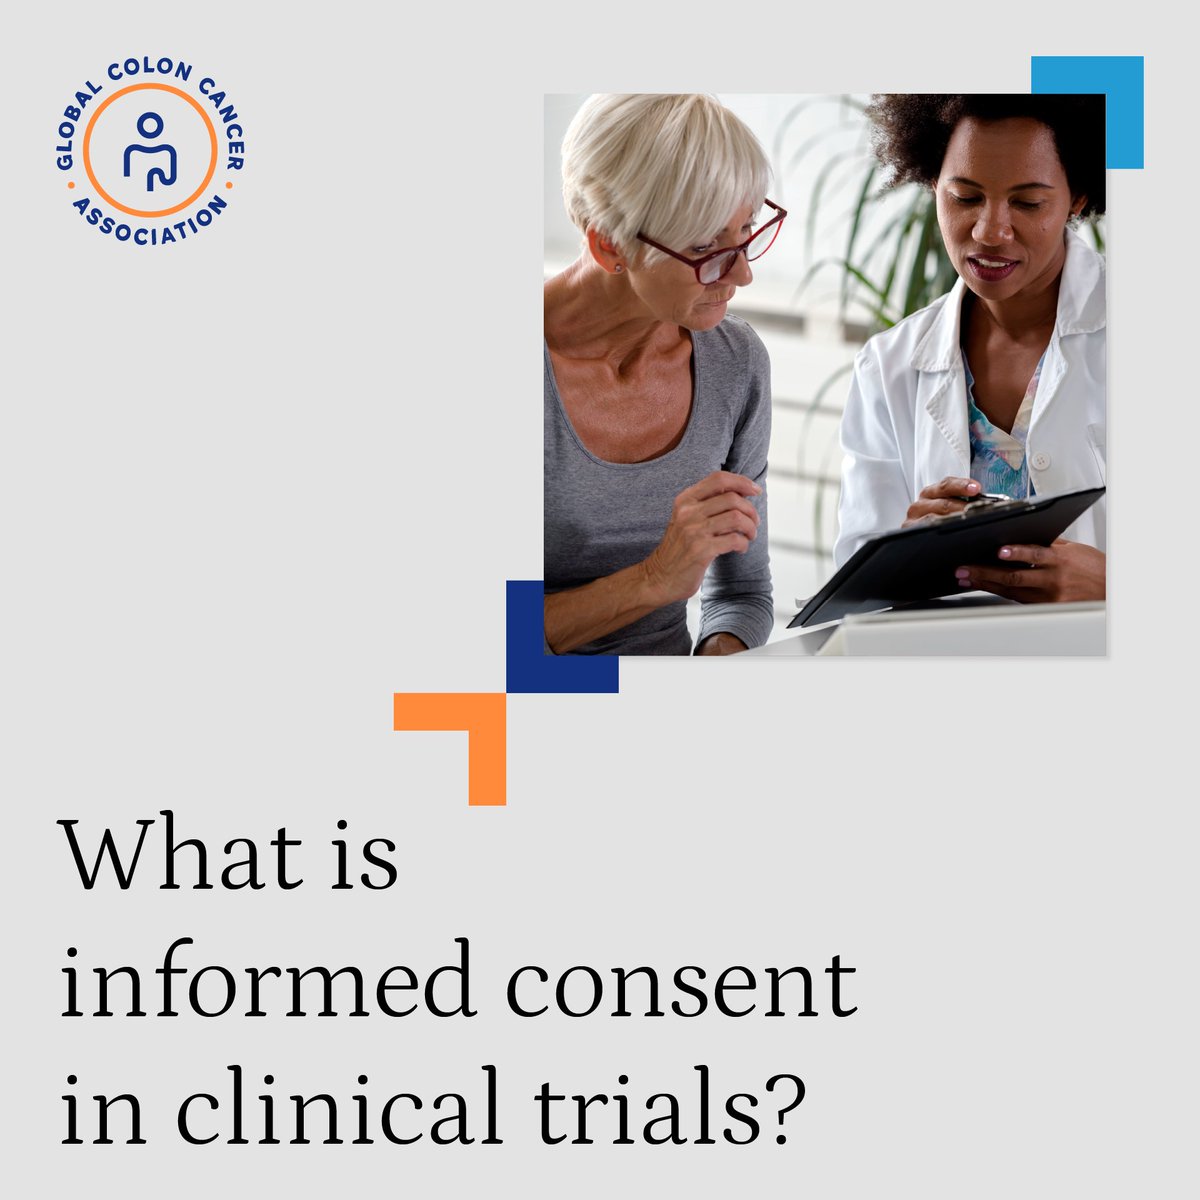 Informed consent is the process in which patients are given important information, including possible risks and benefits, about a medical procedure or treatment, testing, or clinical trial. gcca.info/CTA_Informed_C… #colorectalcancer #clinicaltrialawareness